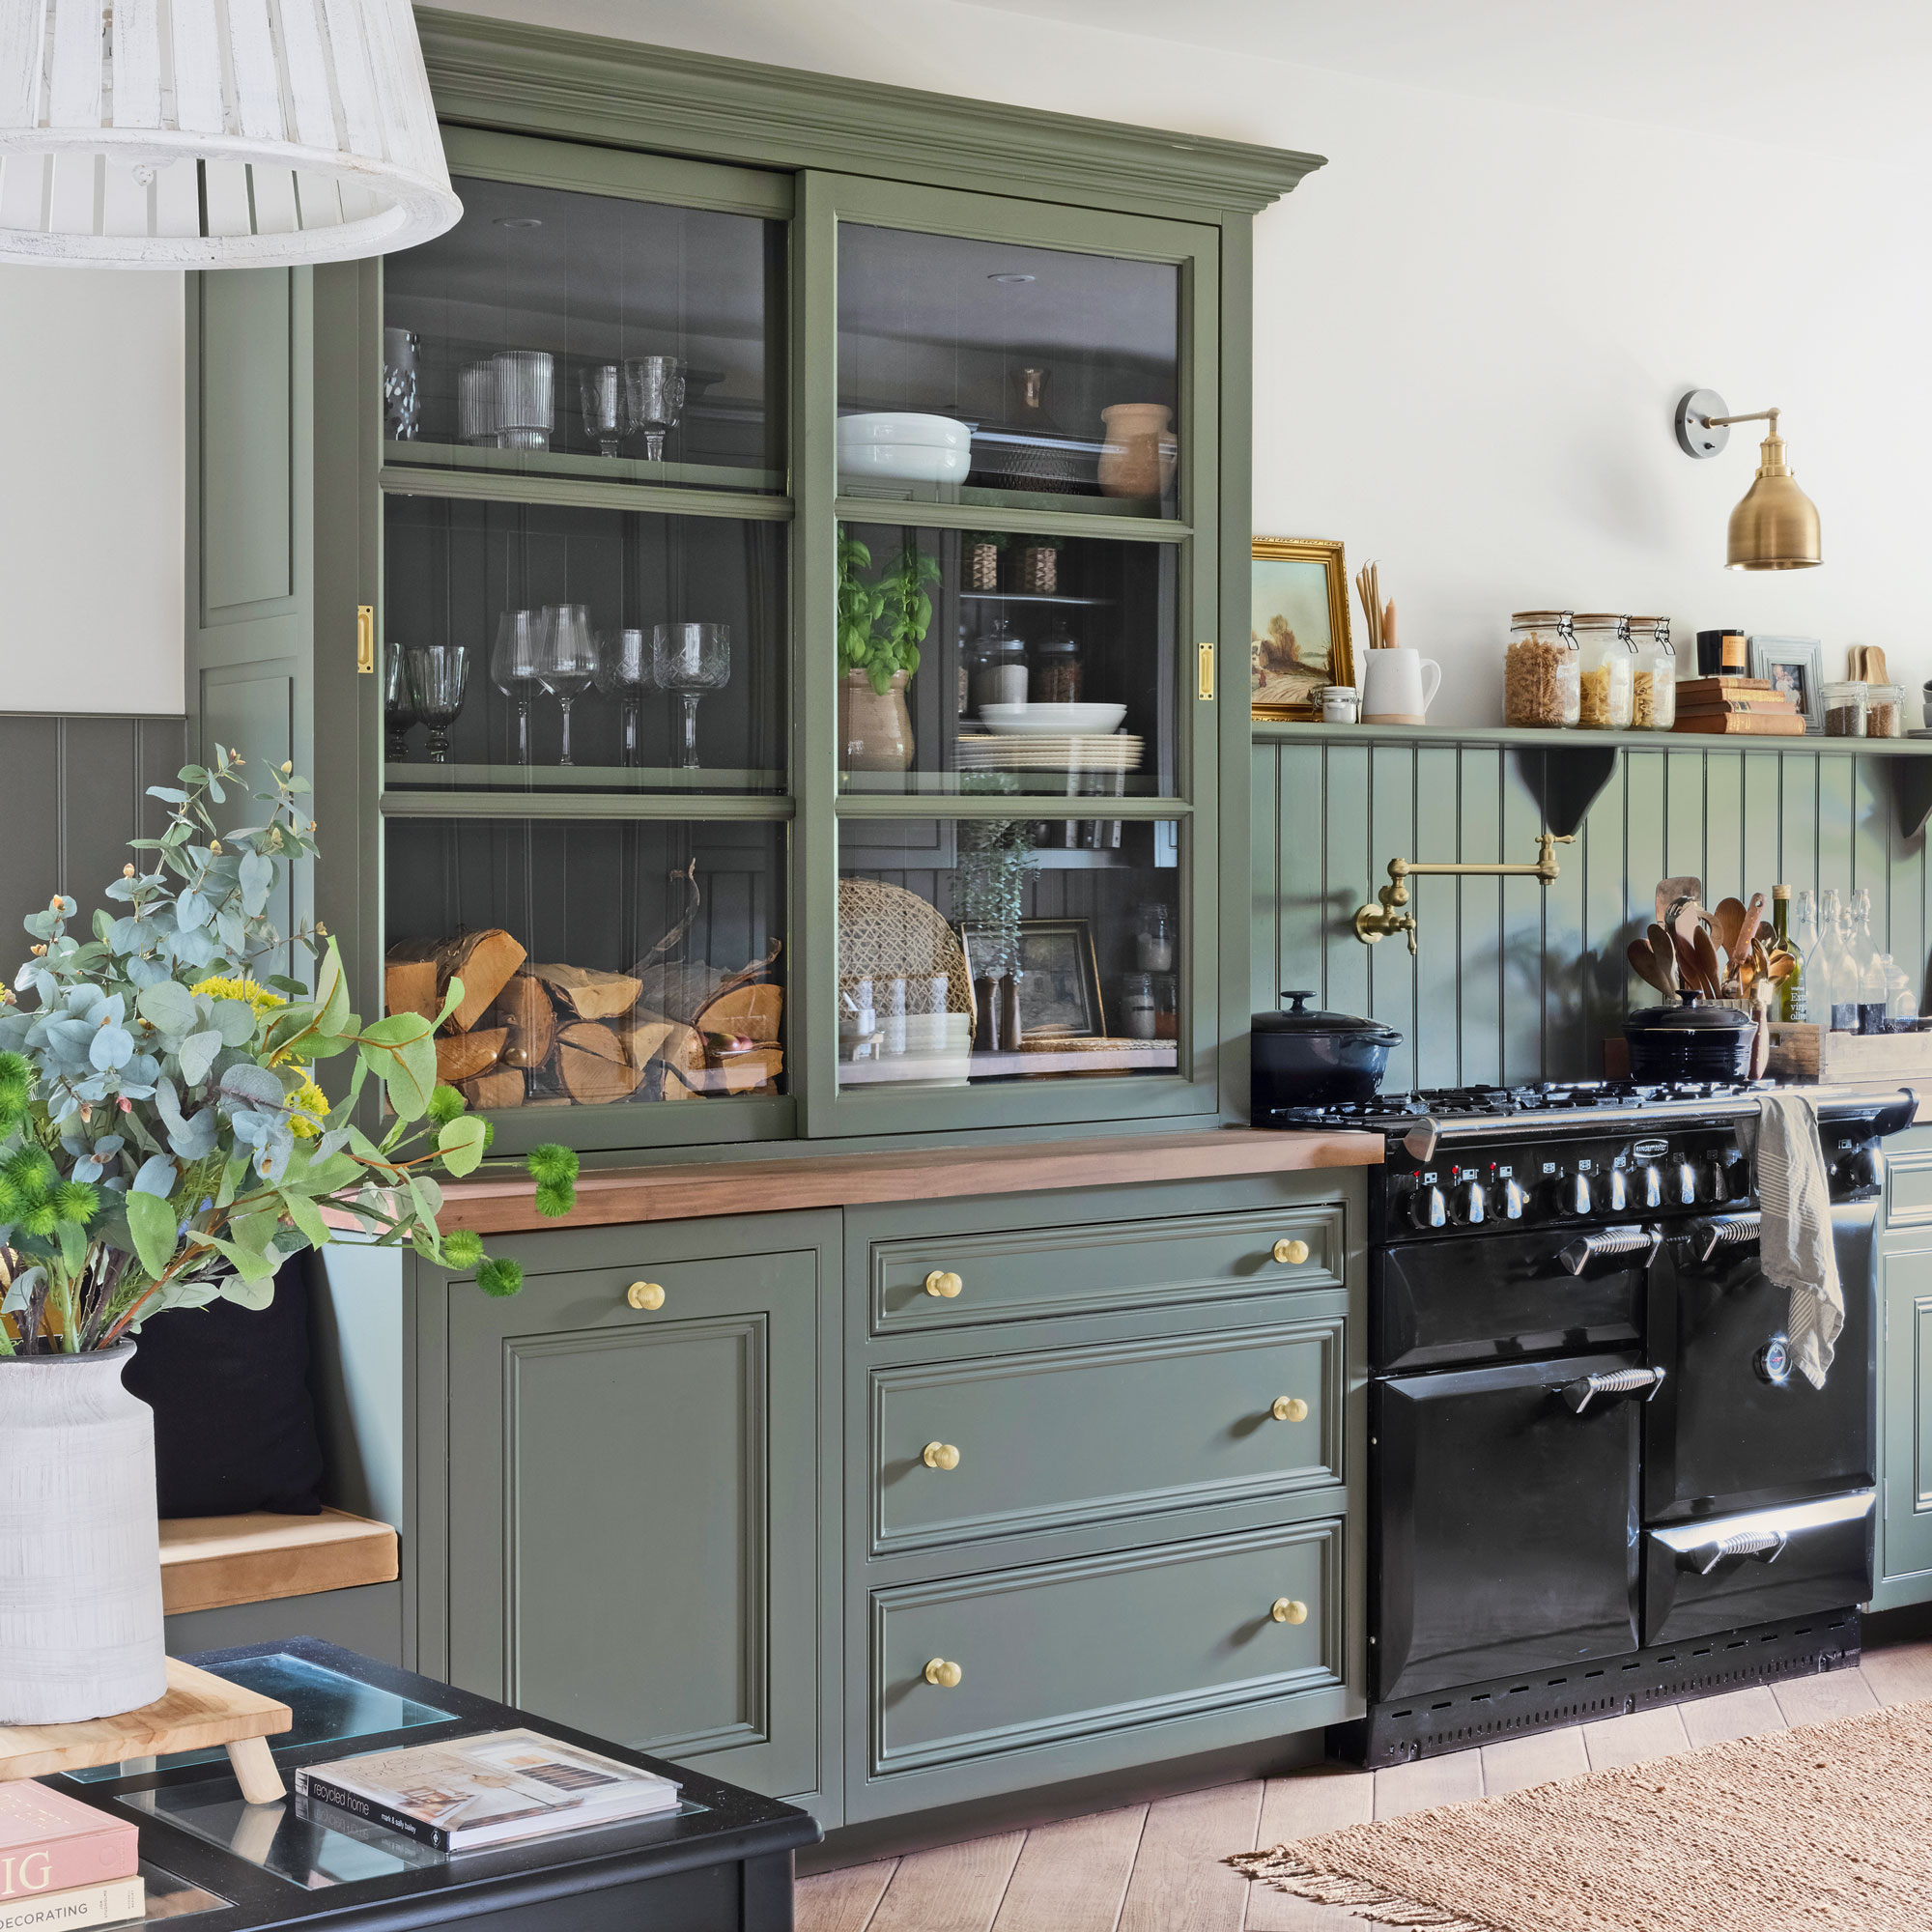 This couple saved thousands on their dream kitchen by going second-hand ...